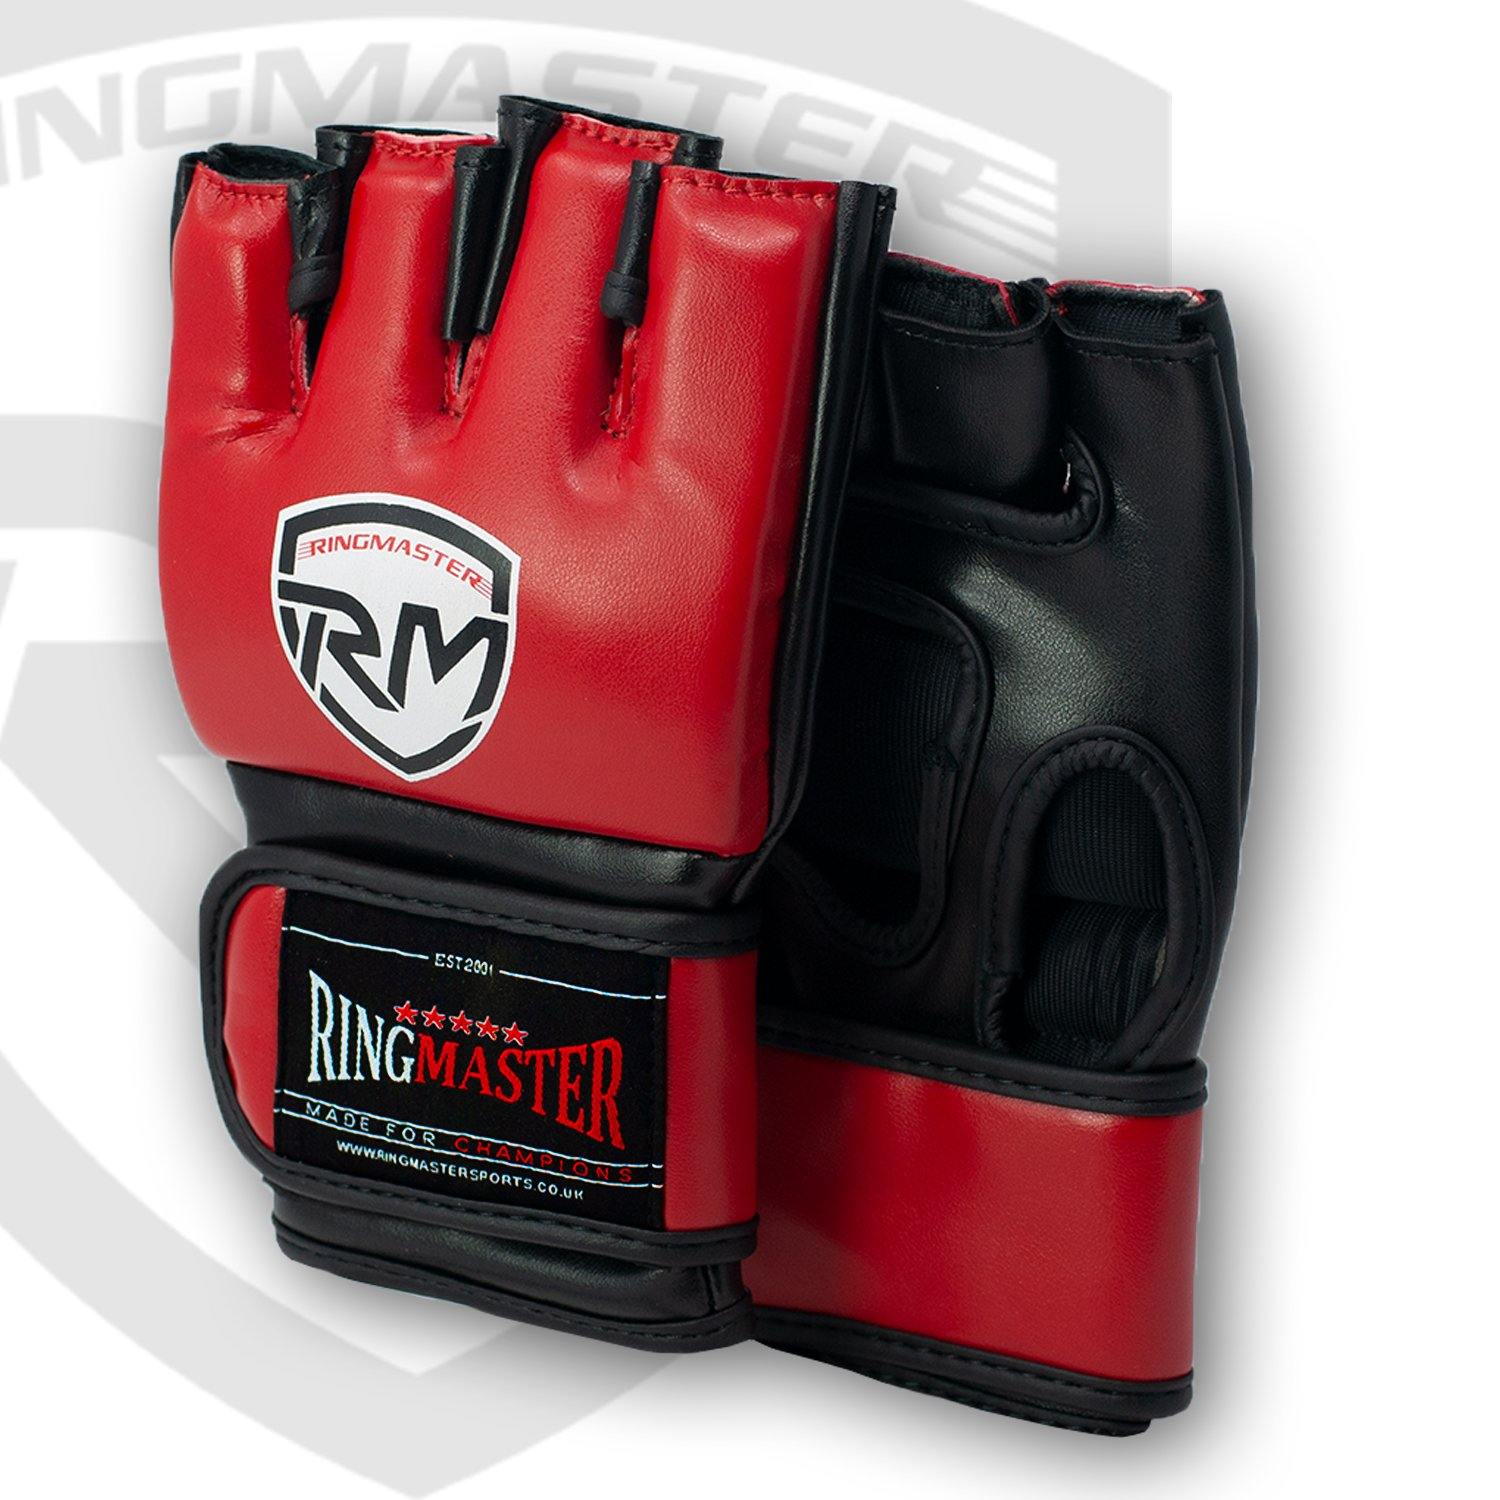 MMA & Shorts and - For Pads, Made RINGMASTER Gloves, SPORTS – Champions Equipment Suits - BJJ BJJ MMA Vests